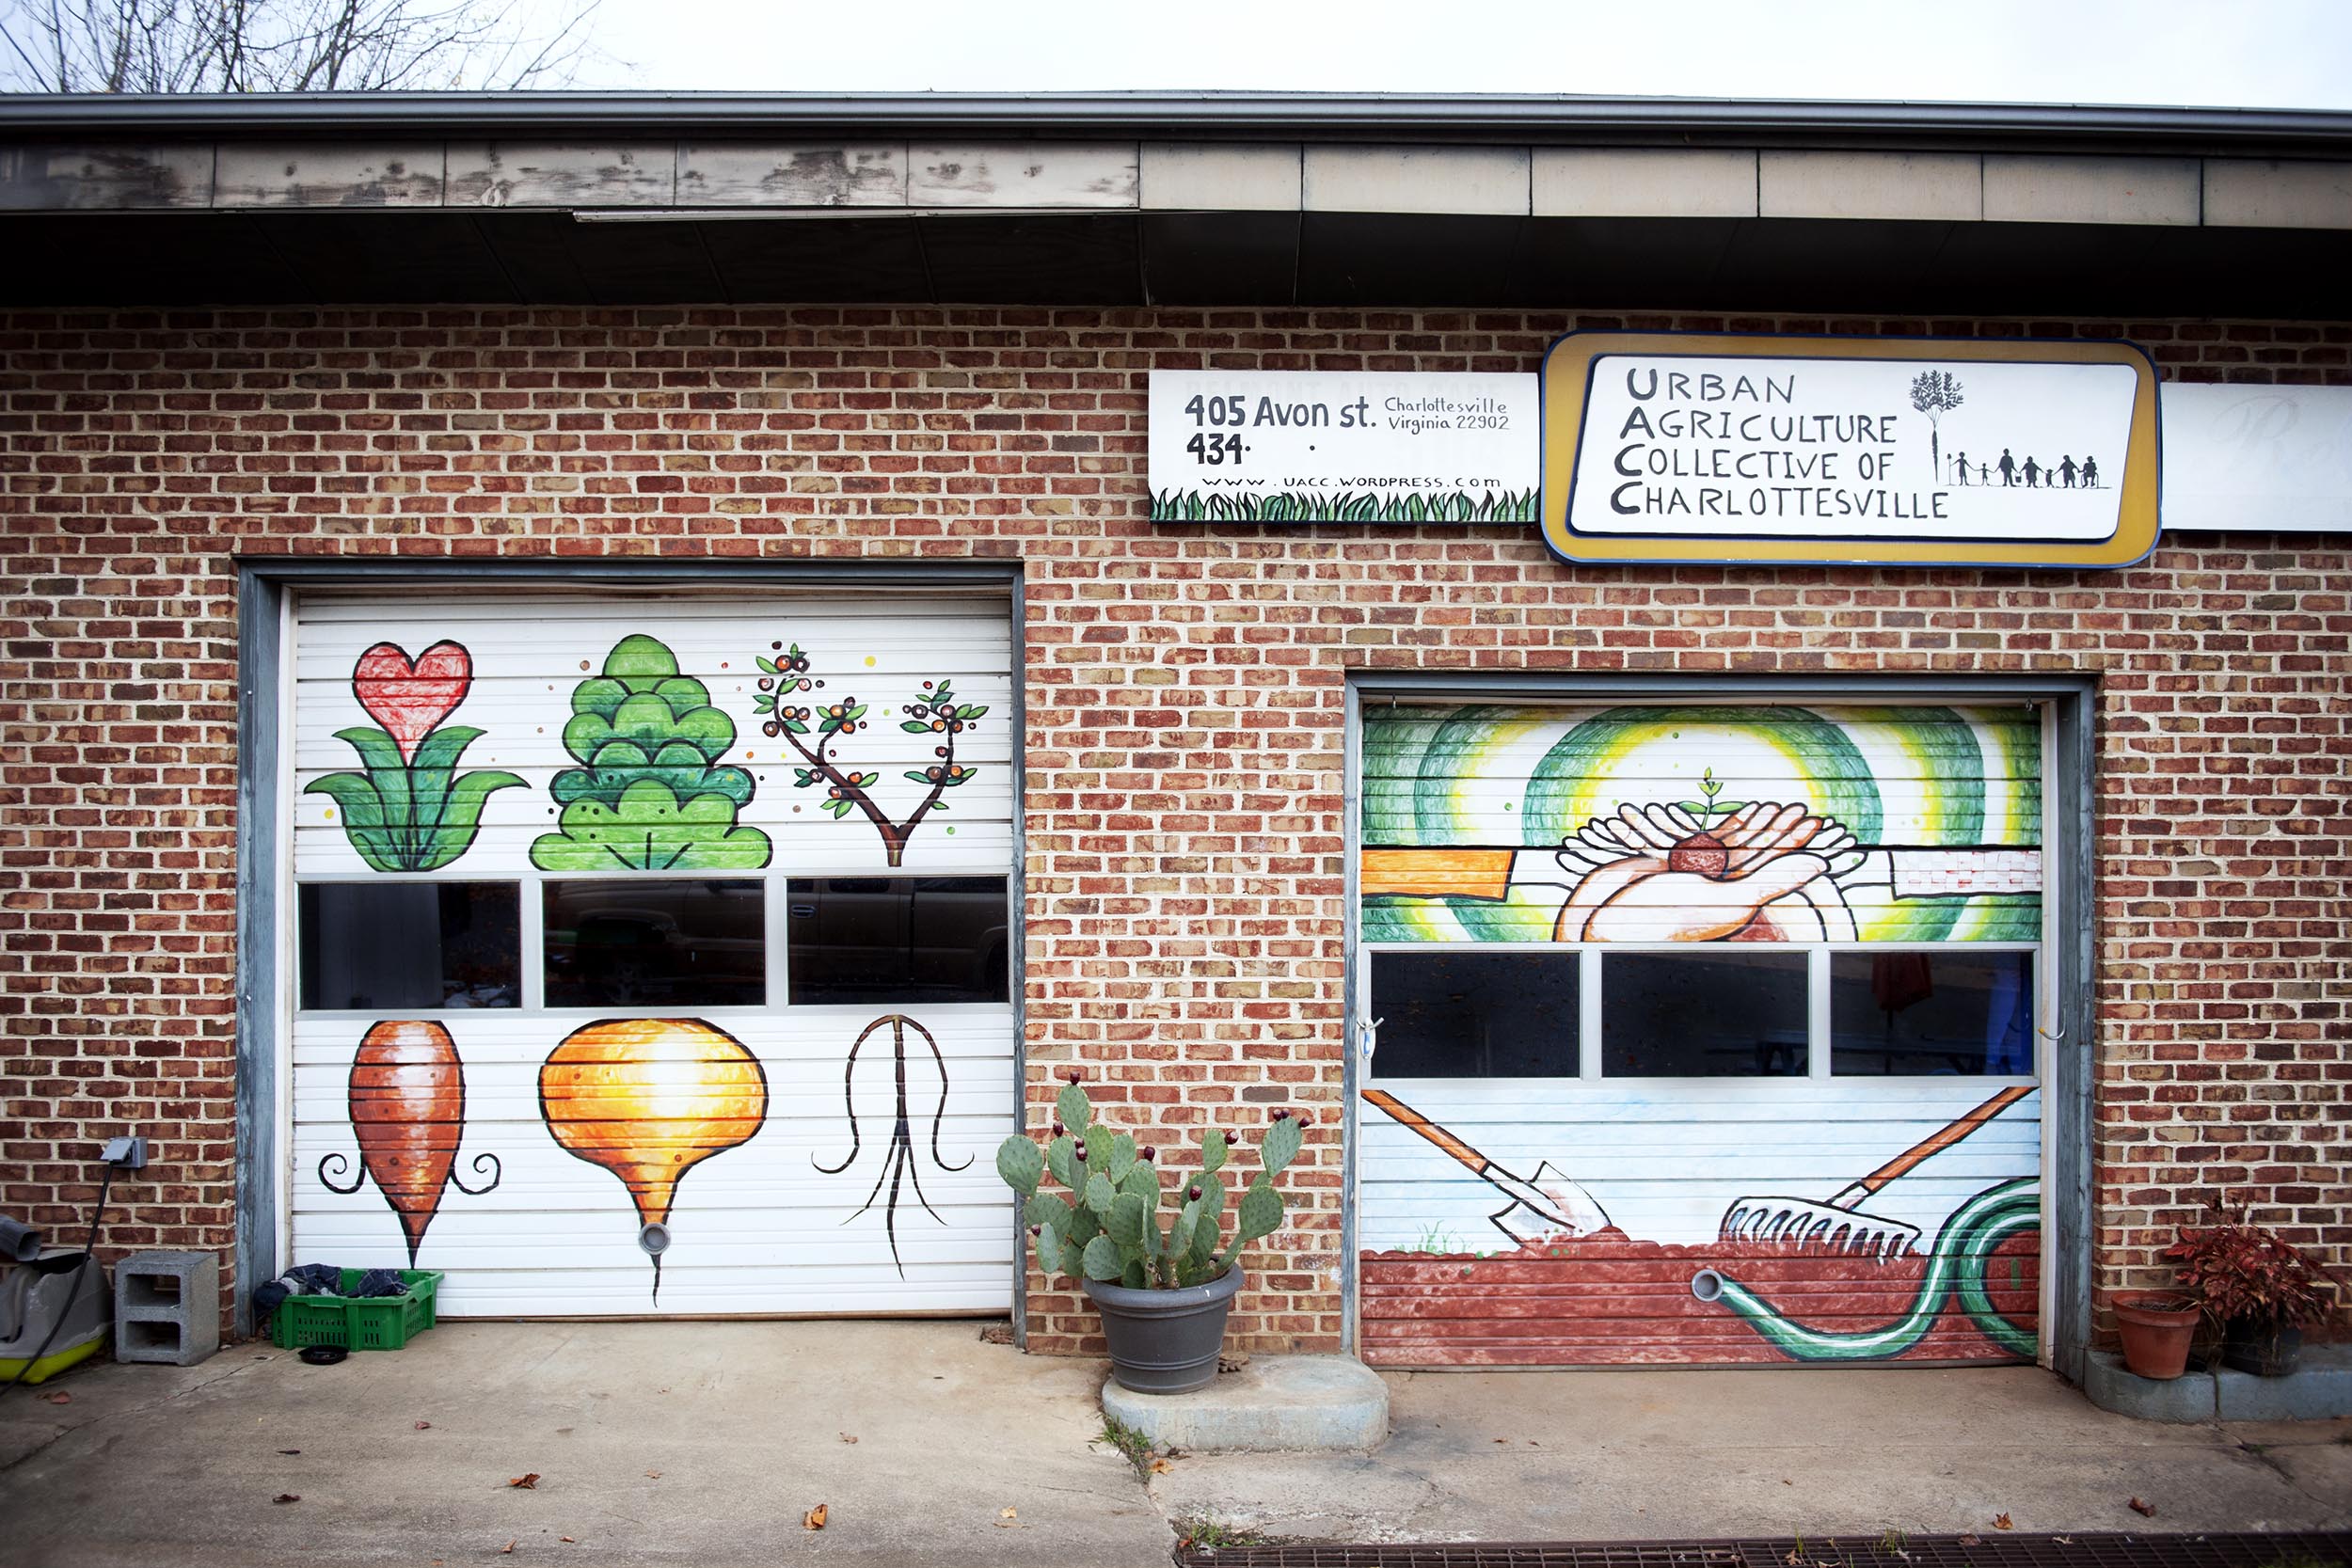 Garage doors on a brick building with paintings.  Left: 3 vegetables right: hands holding a vegetable and a shovel, rake, and water hose sitting on dirt